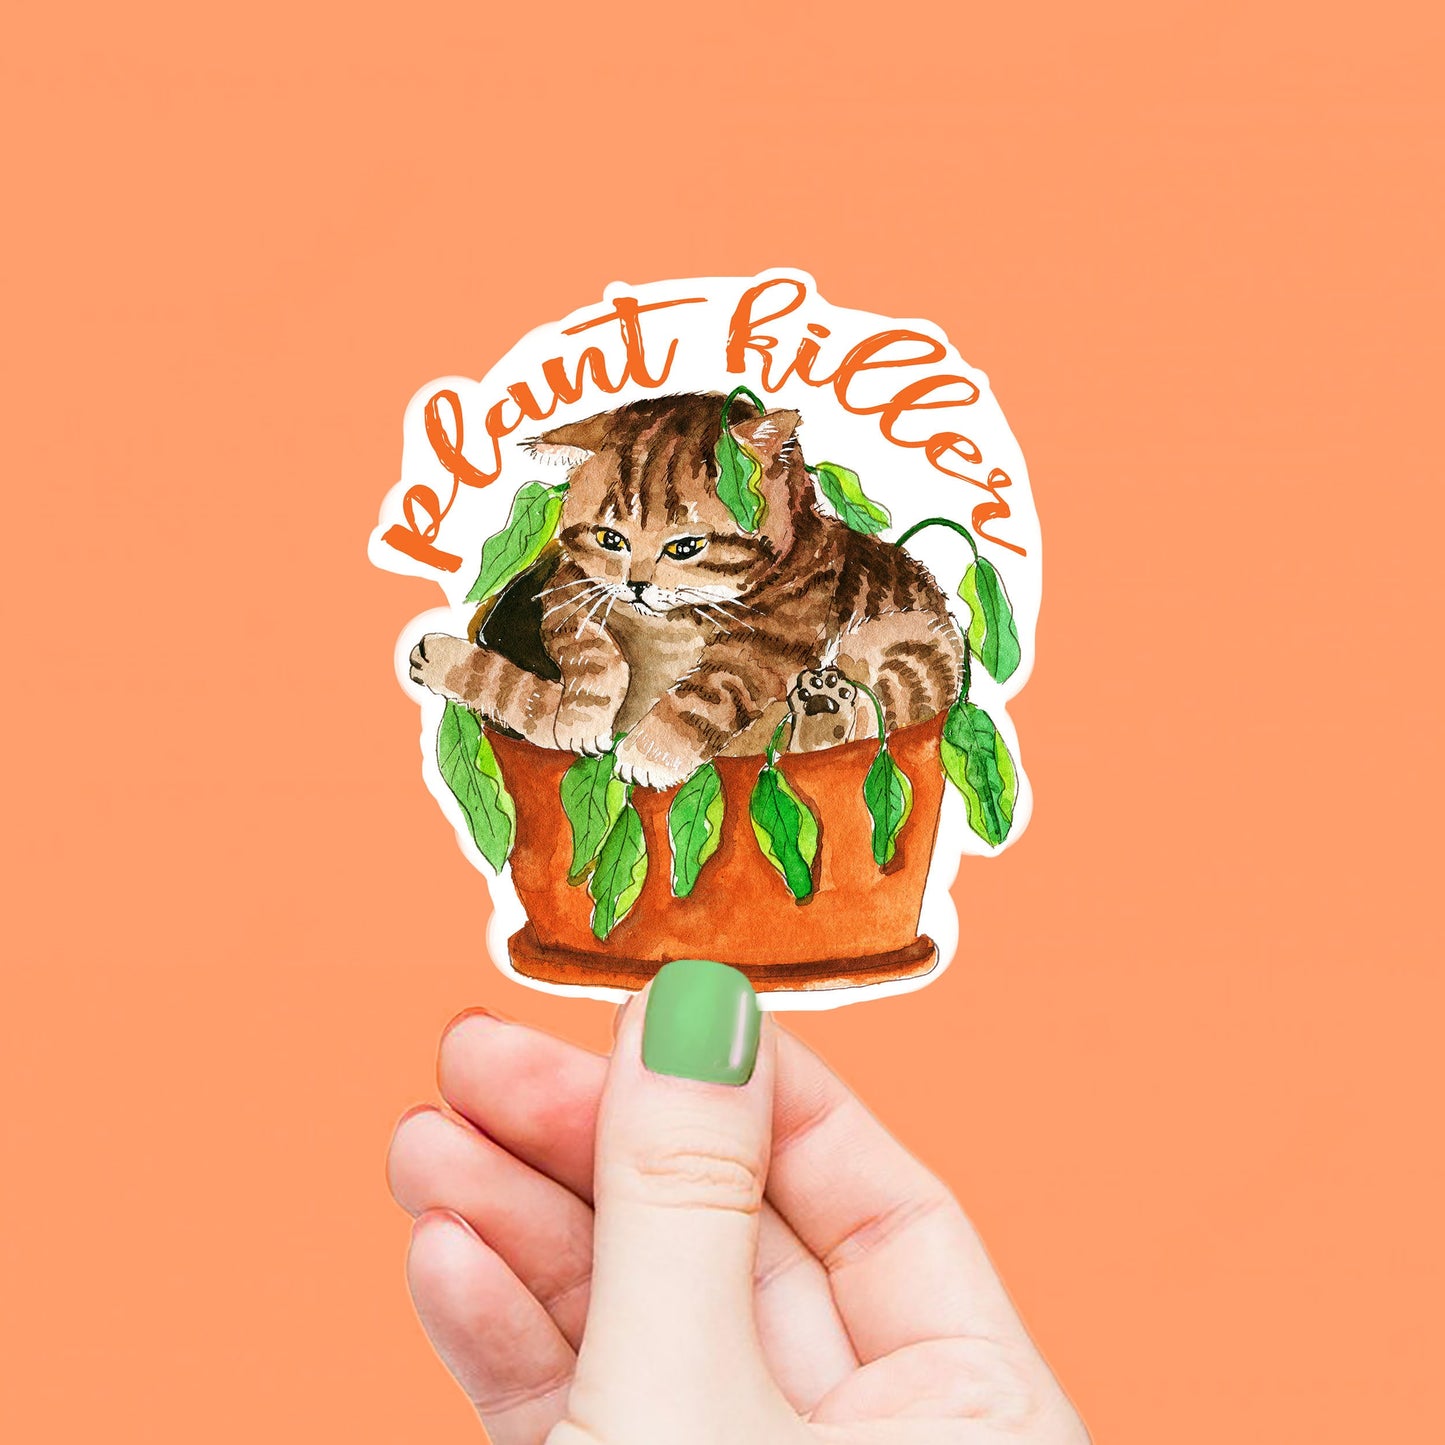 Plant Killer Cat Stickers For Plant Mom - Funny Waterproof Stickers For Cat Lover - Dead Plants Sticker For Gardener Gifts